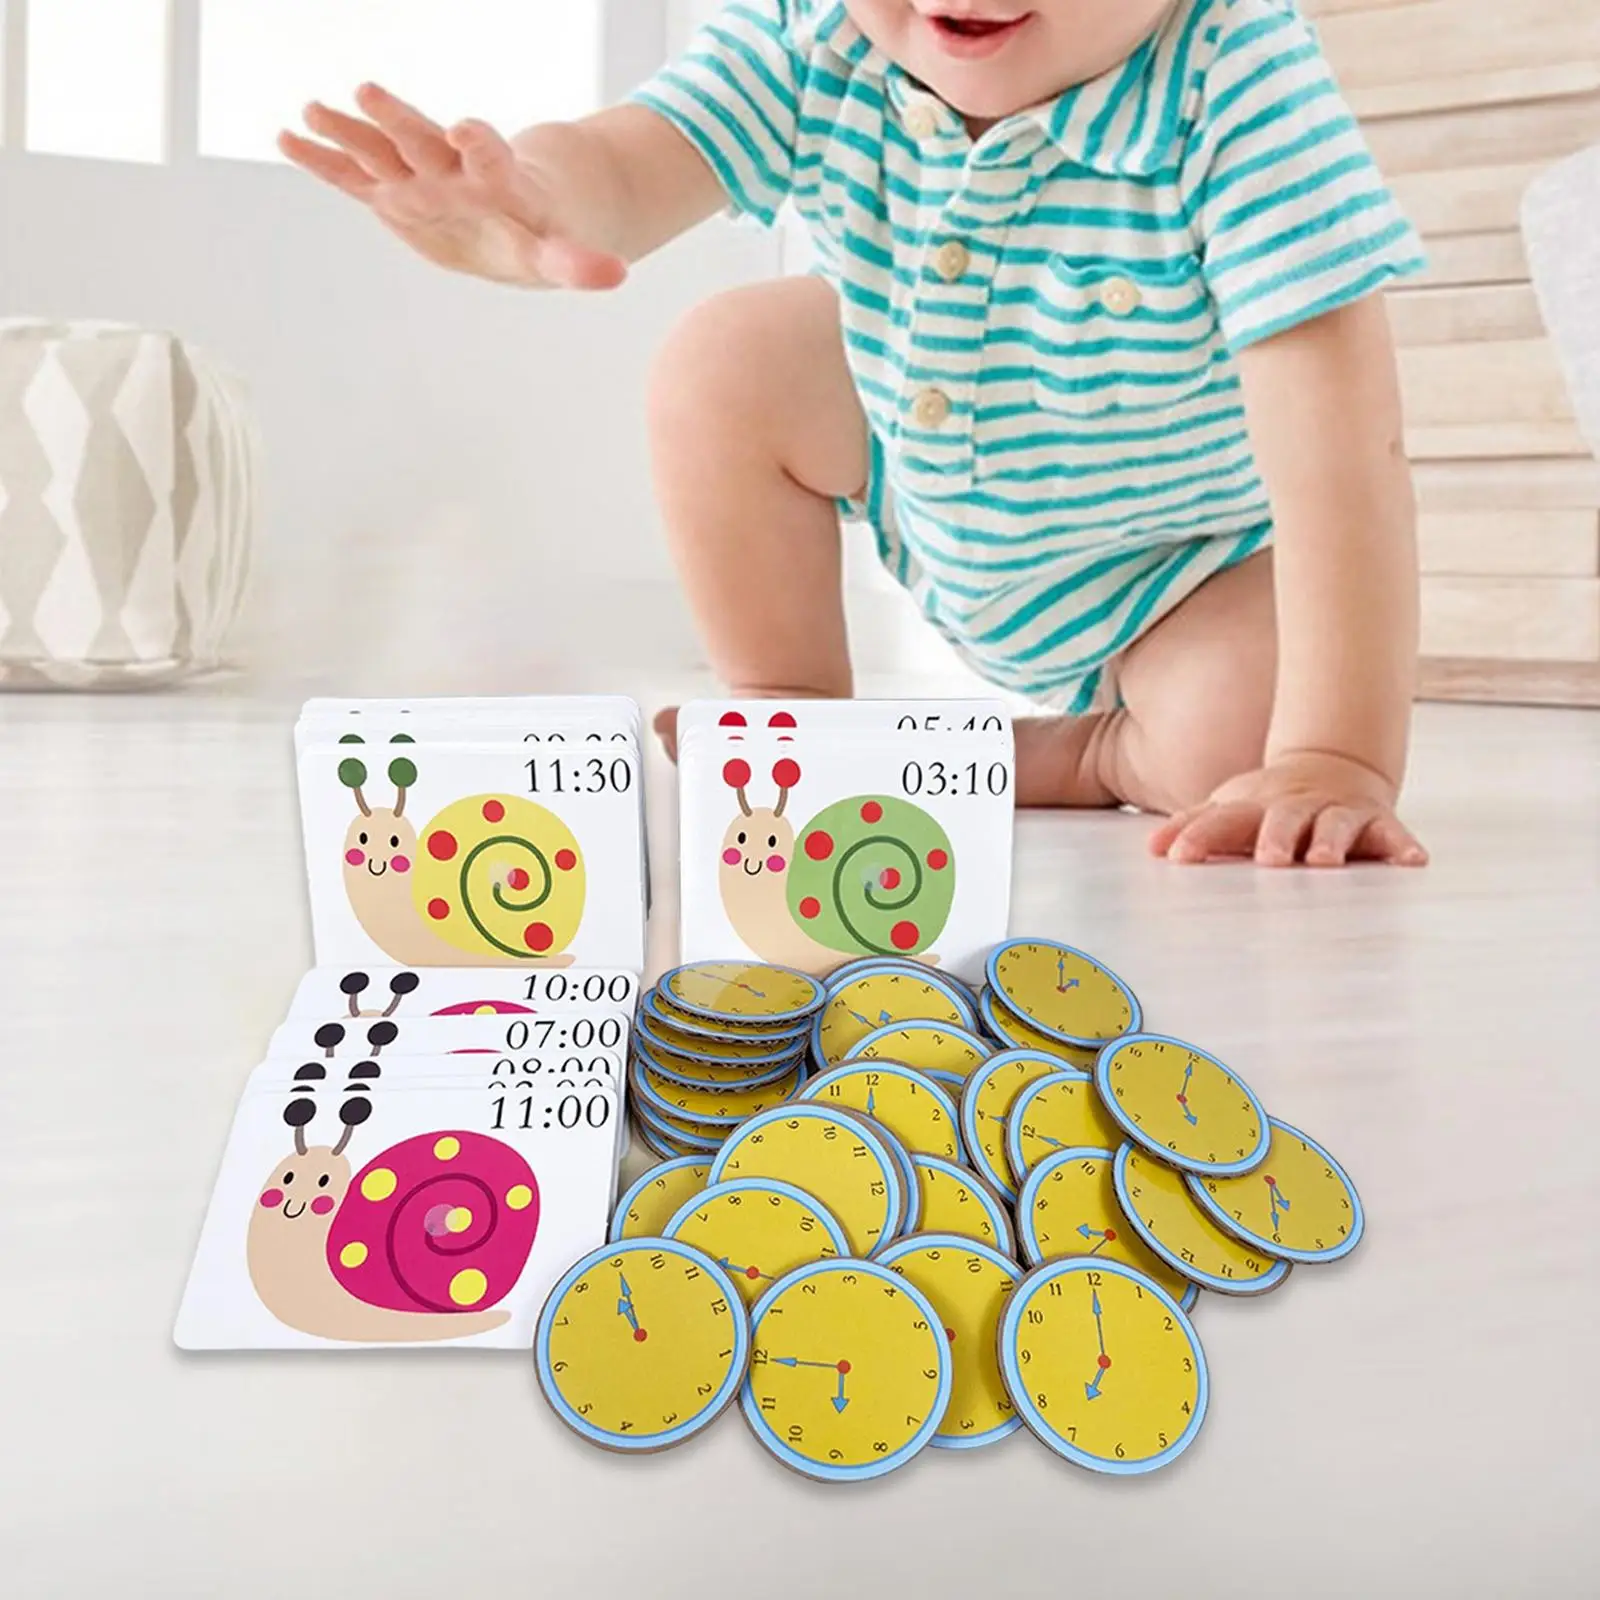 Montessori Teaching Clock Cards for Ages 3-7 Learning Activities Time Learning Toys